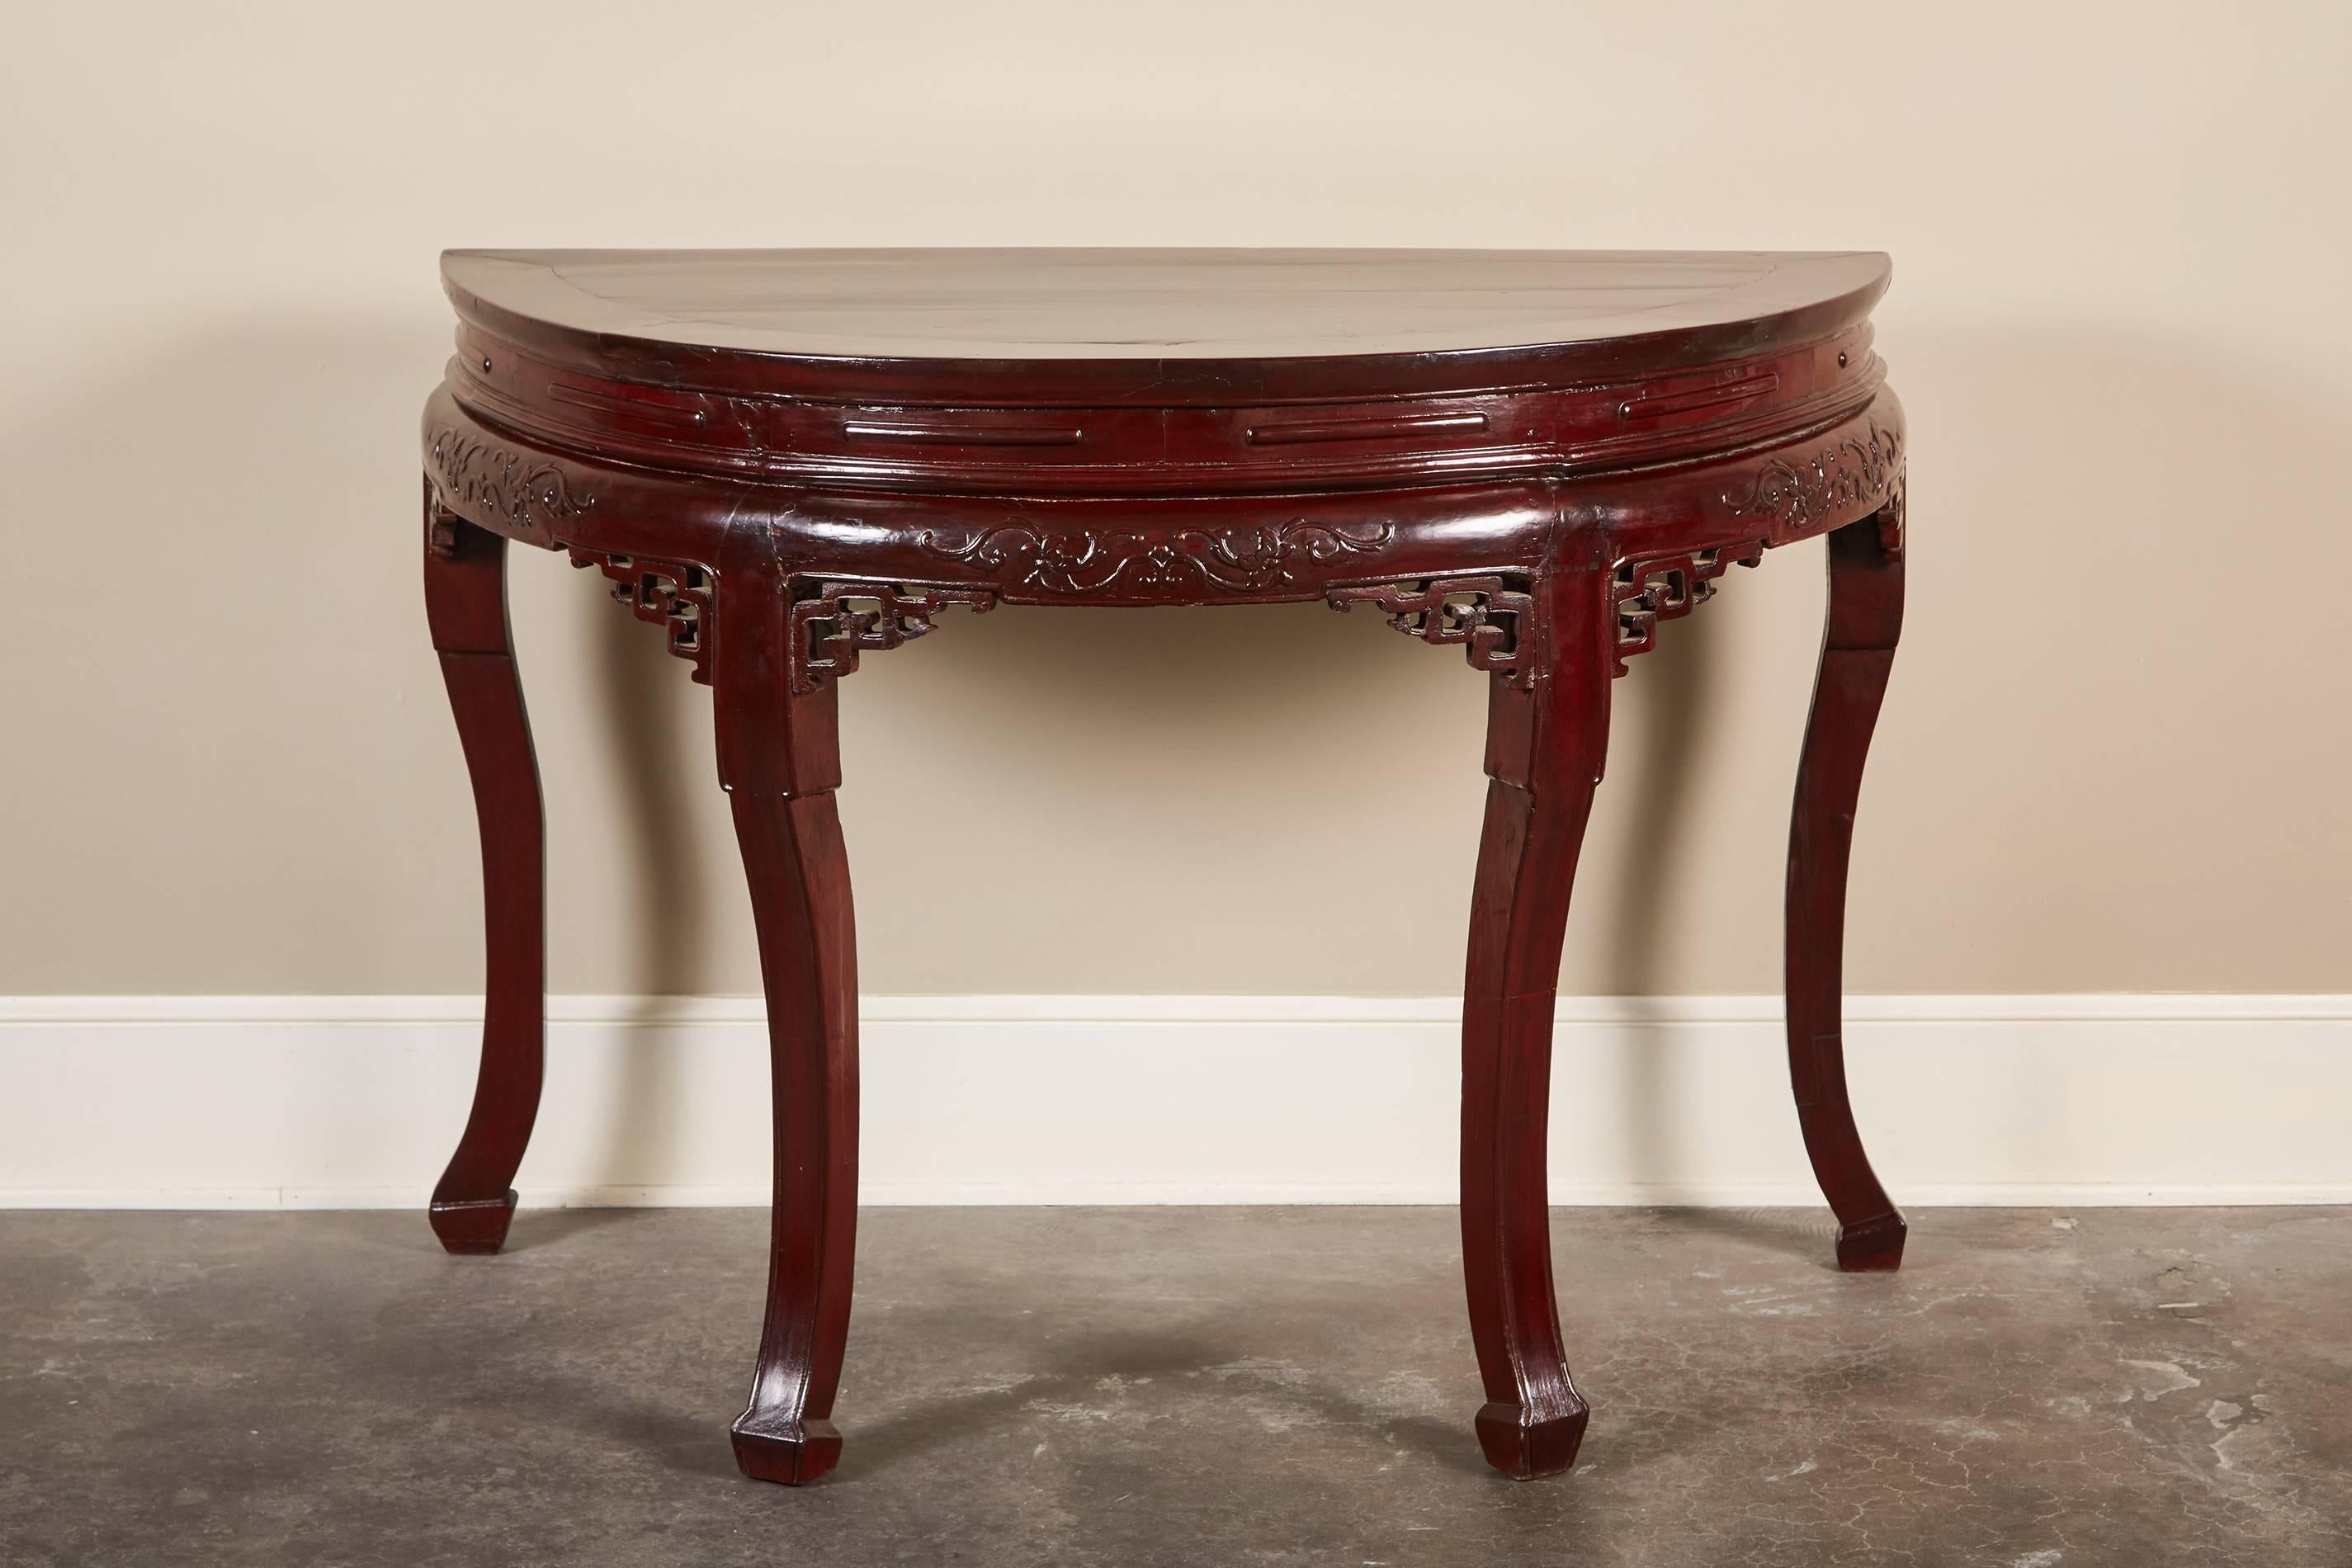 Pair of 19th century Chinese demilunes or center table of the Qing Dyansty. maroon lacquer and delicate carvings along the apron.